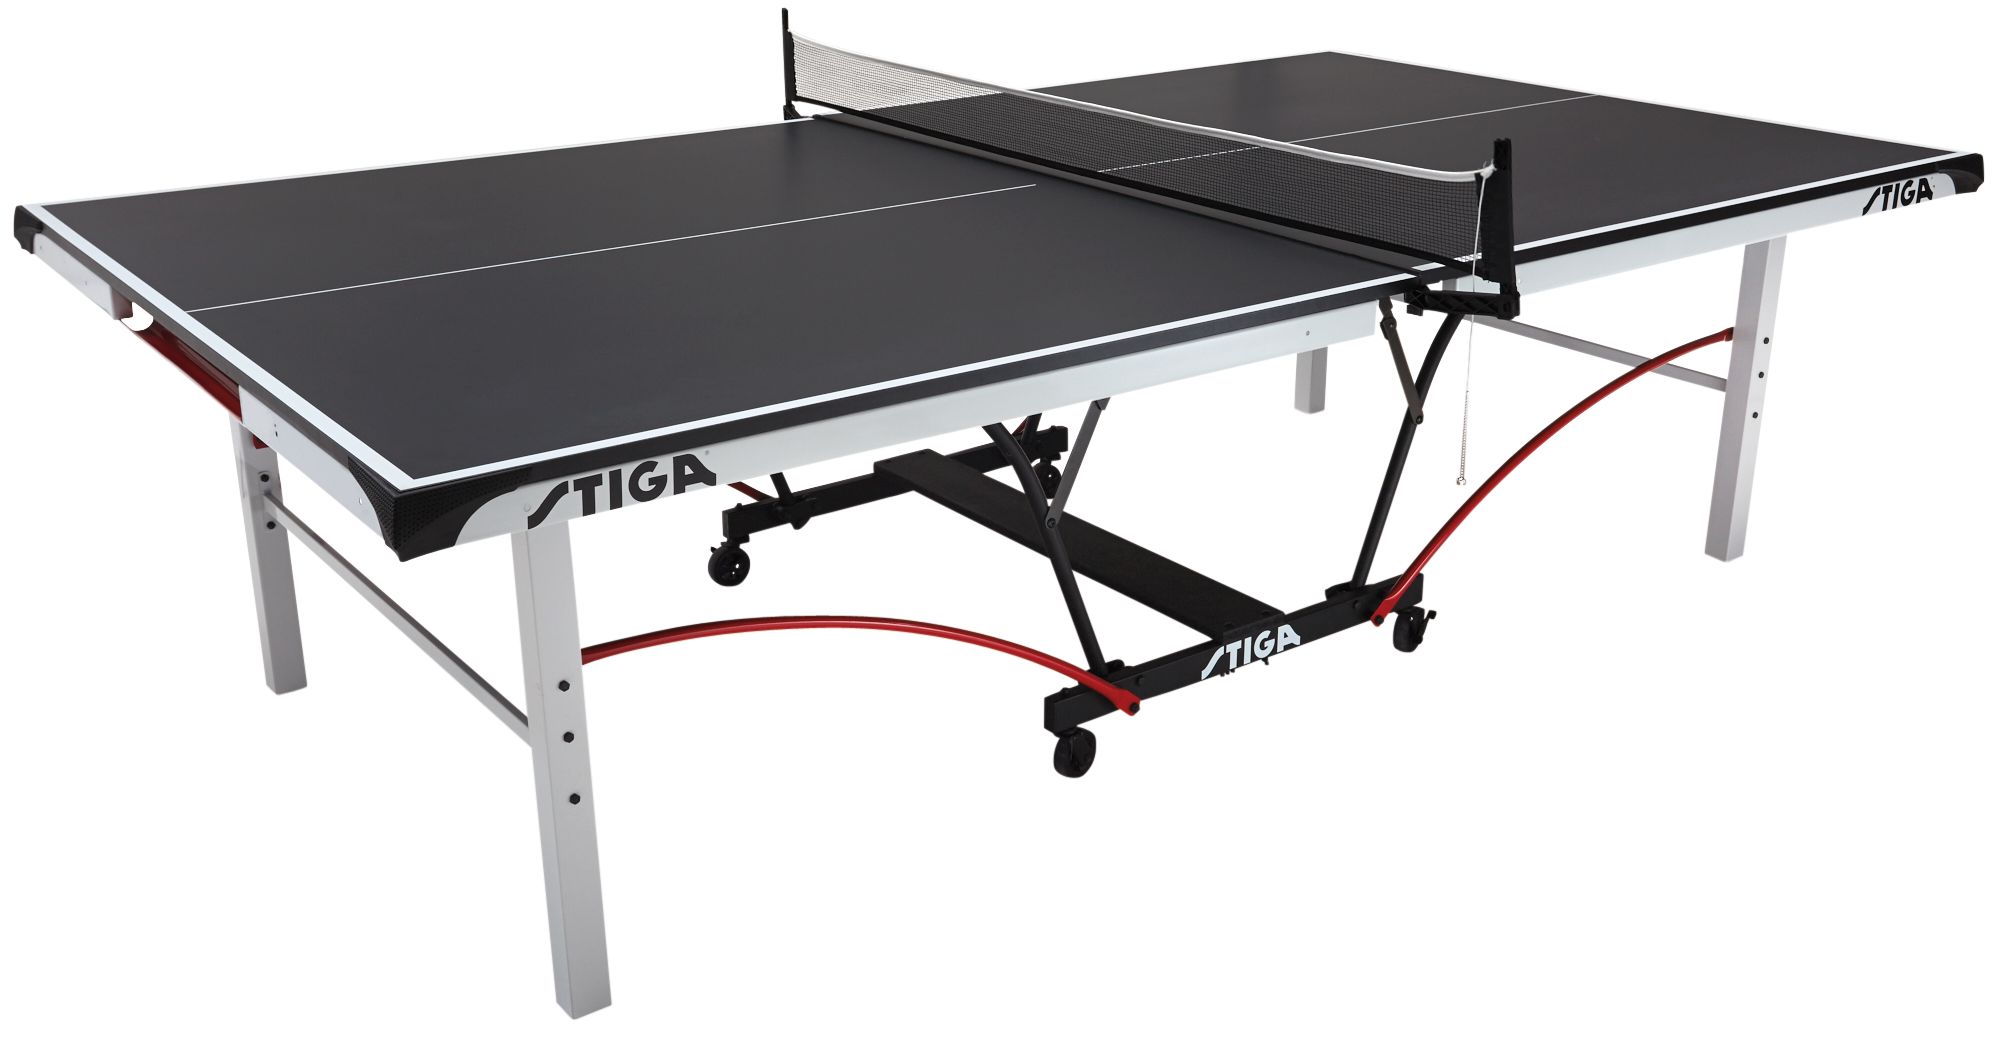 [Instore only] Stiga Master Series ST3100 Competition Indoor Table Tennis Table $199.99